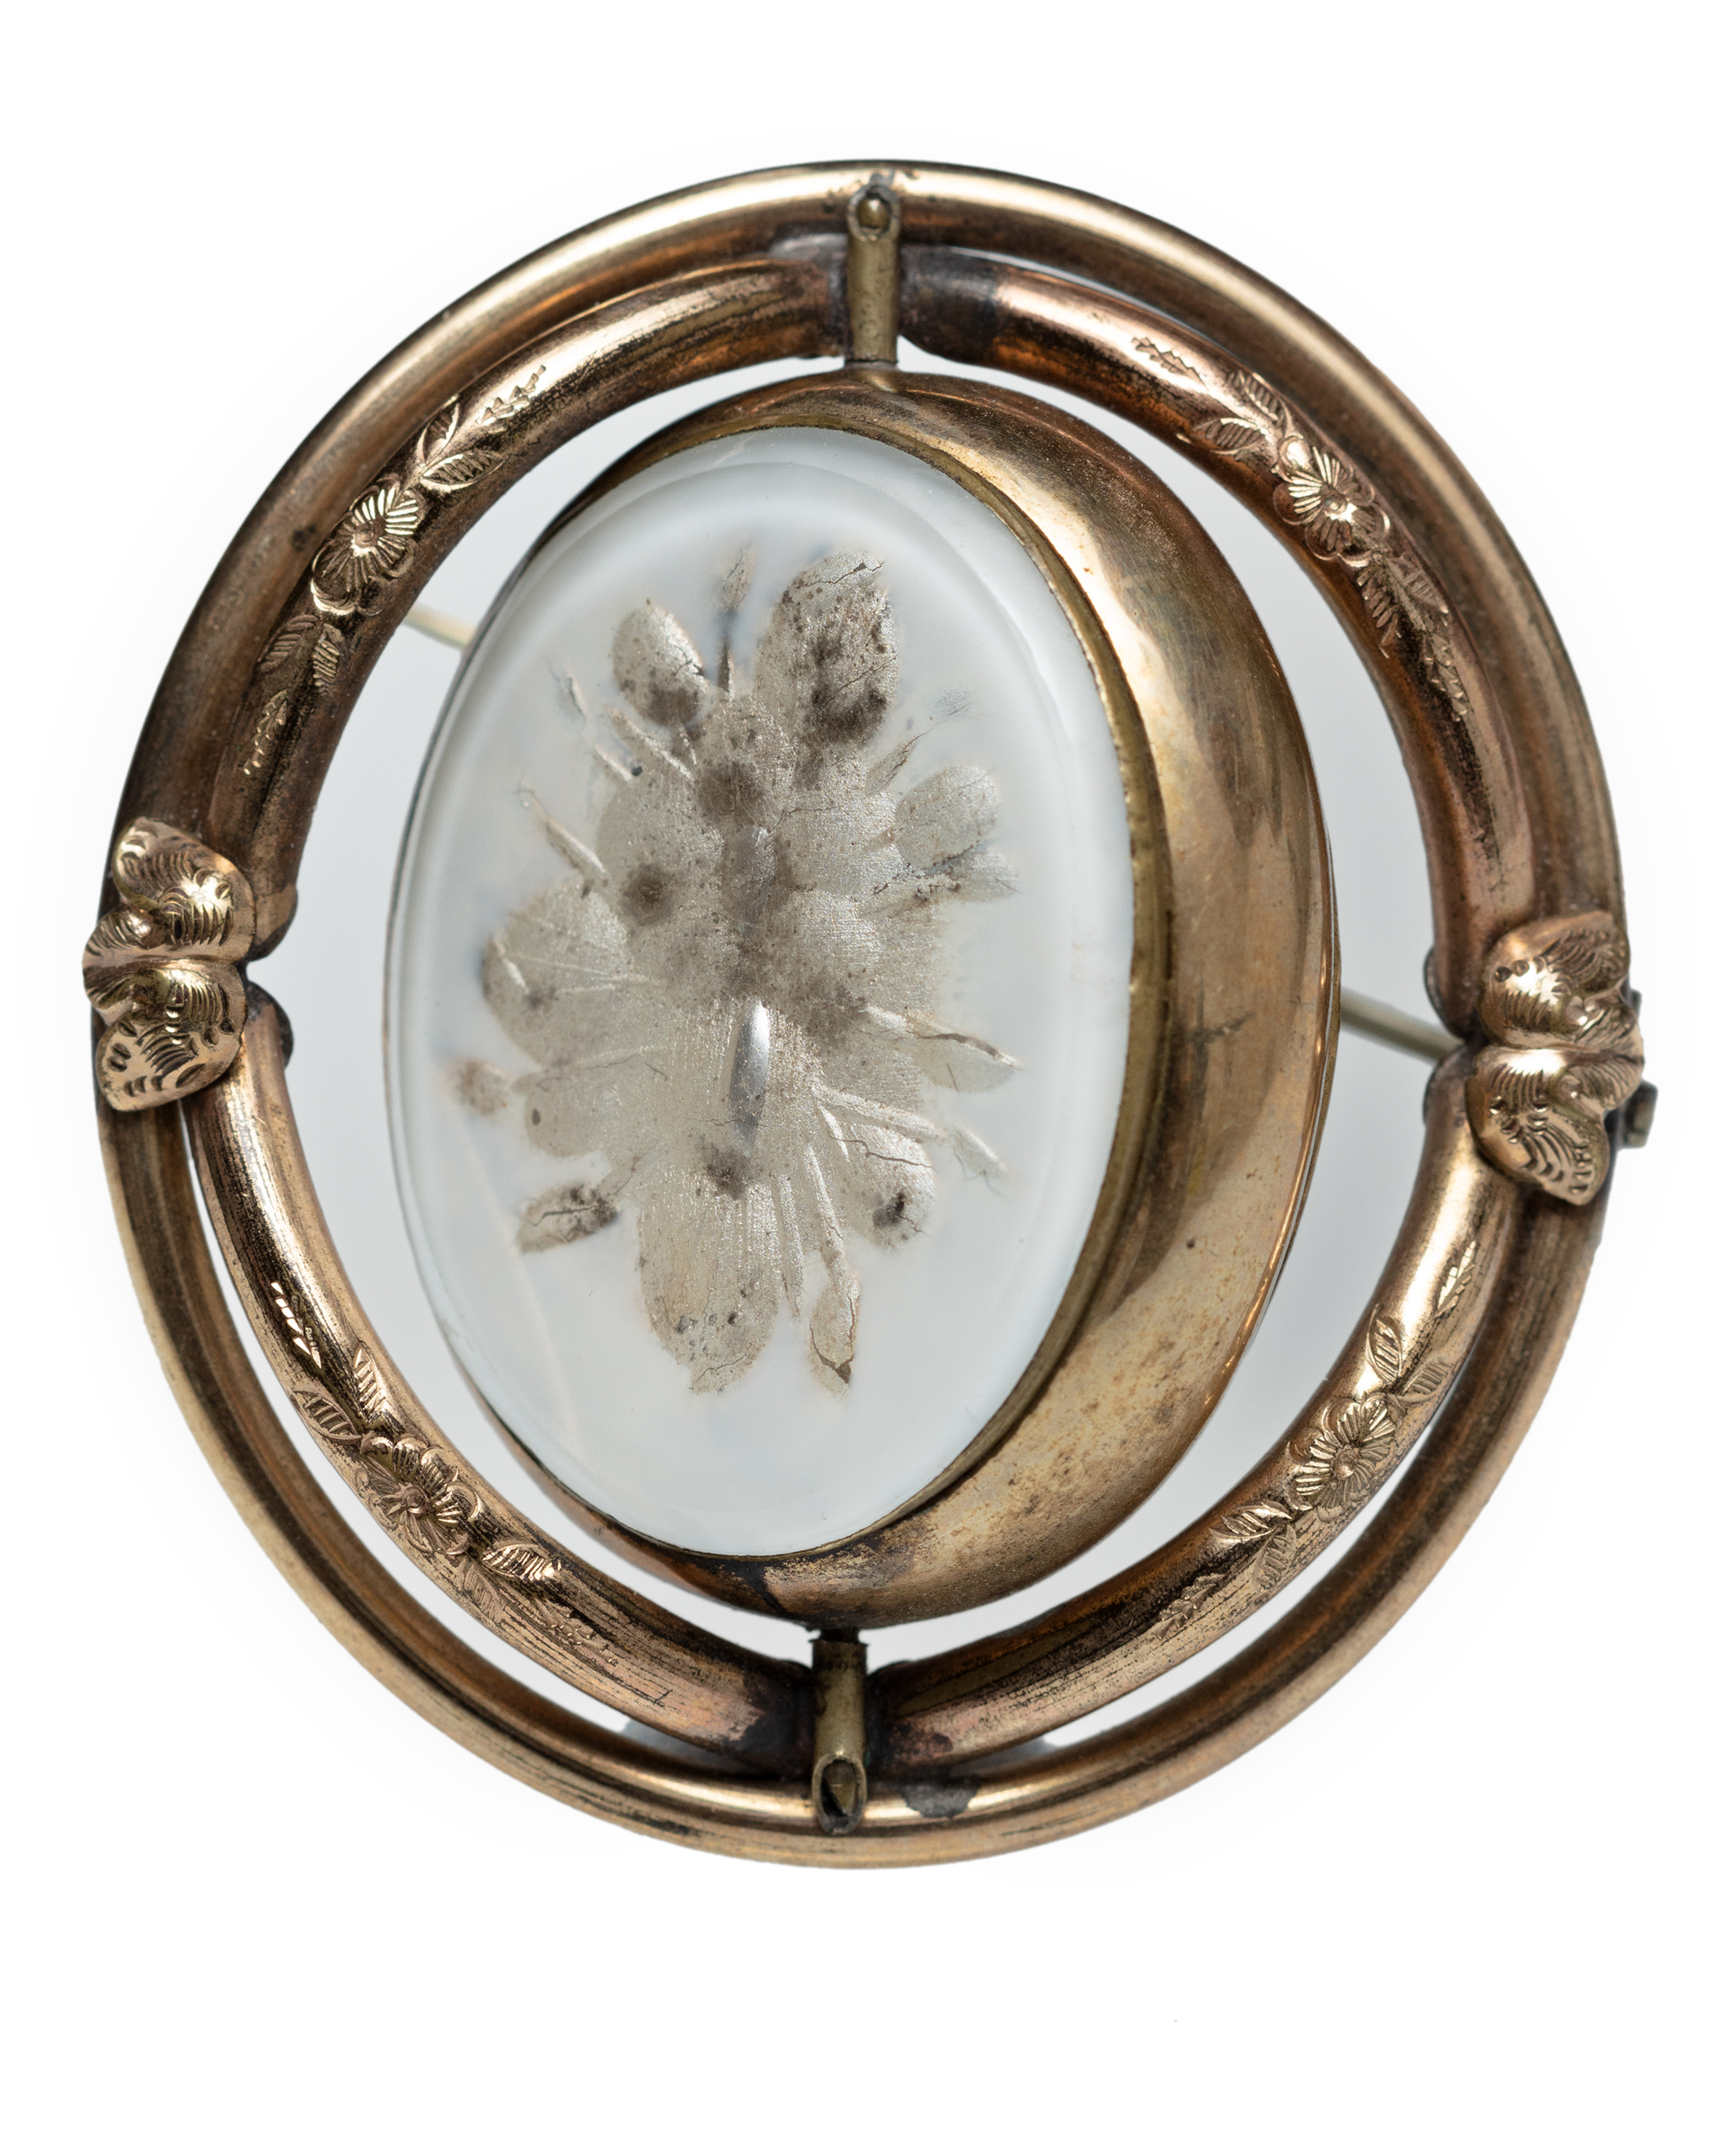 Unidentified photographer, [Double-sided brooch with photographic portrait and floral motif], [date unknown] (brass, dried flowers, tintype). Courtesy of the Howard and Carole Tanenbaum Photography Collection